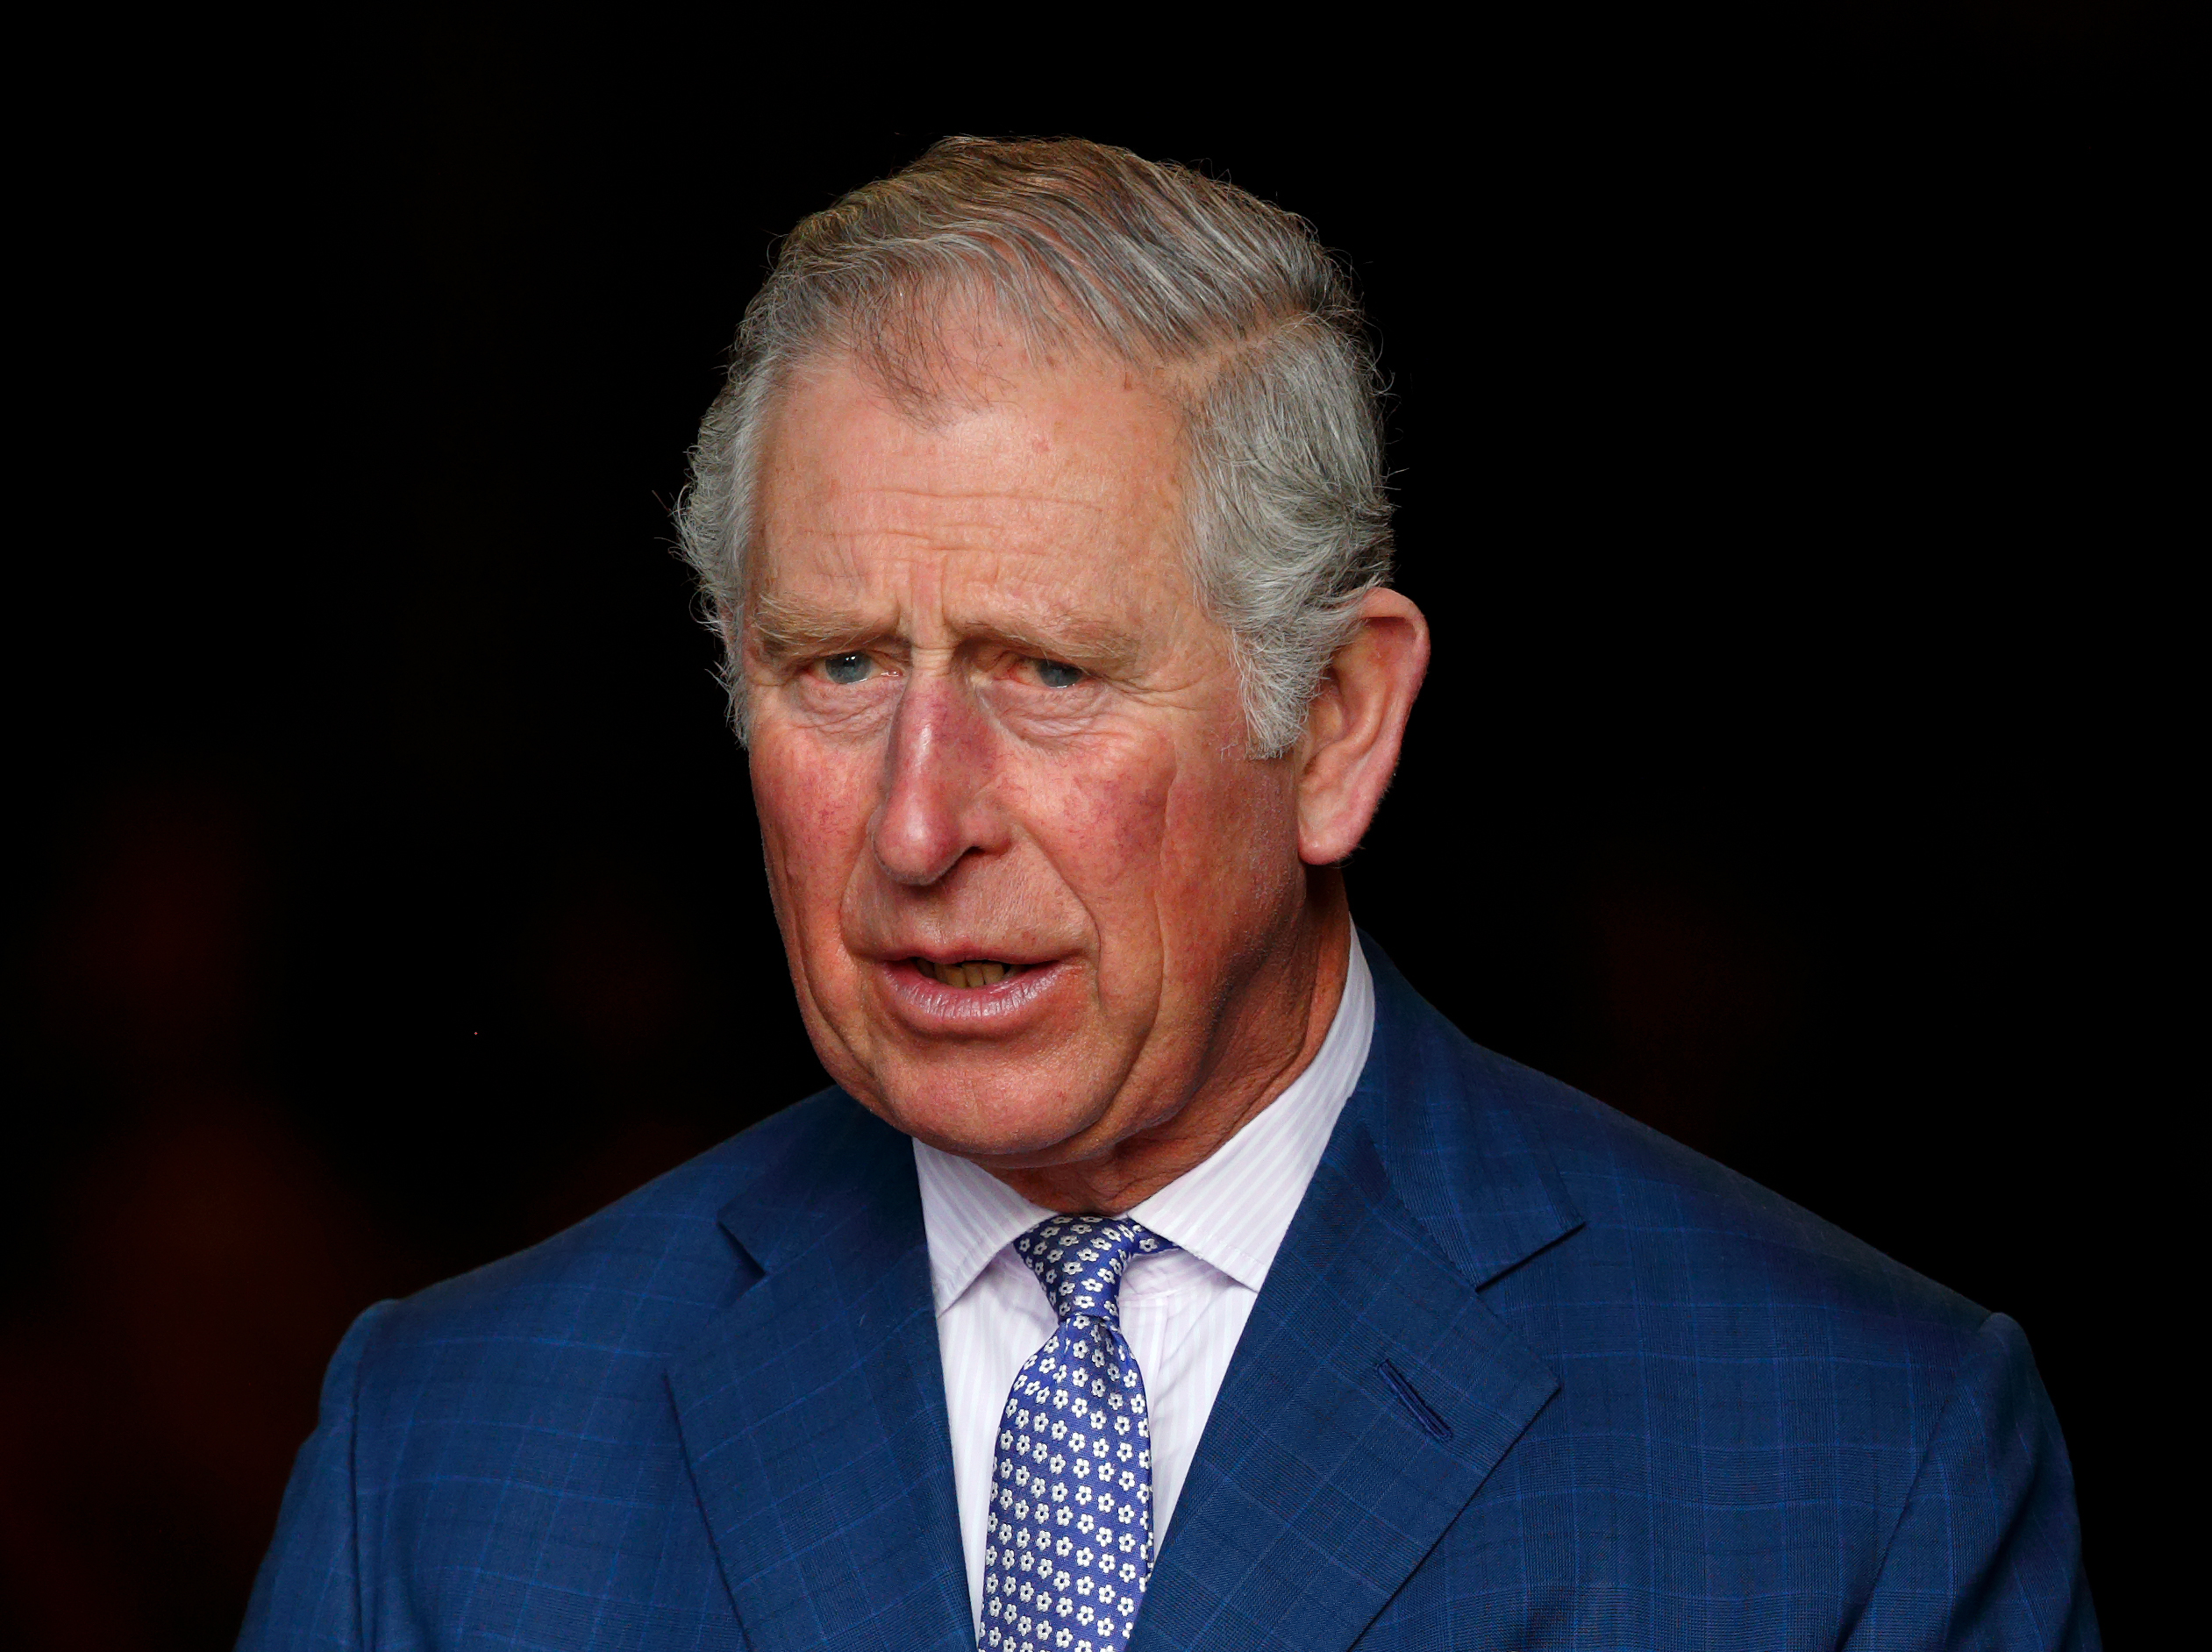 MARCH 13 2017- Prince Charles, Prince of Wales attends a Commonwealth Day Service at Westminster Abbey (Max Mumby/Indigo&mdash;Getty Images)